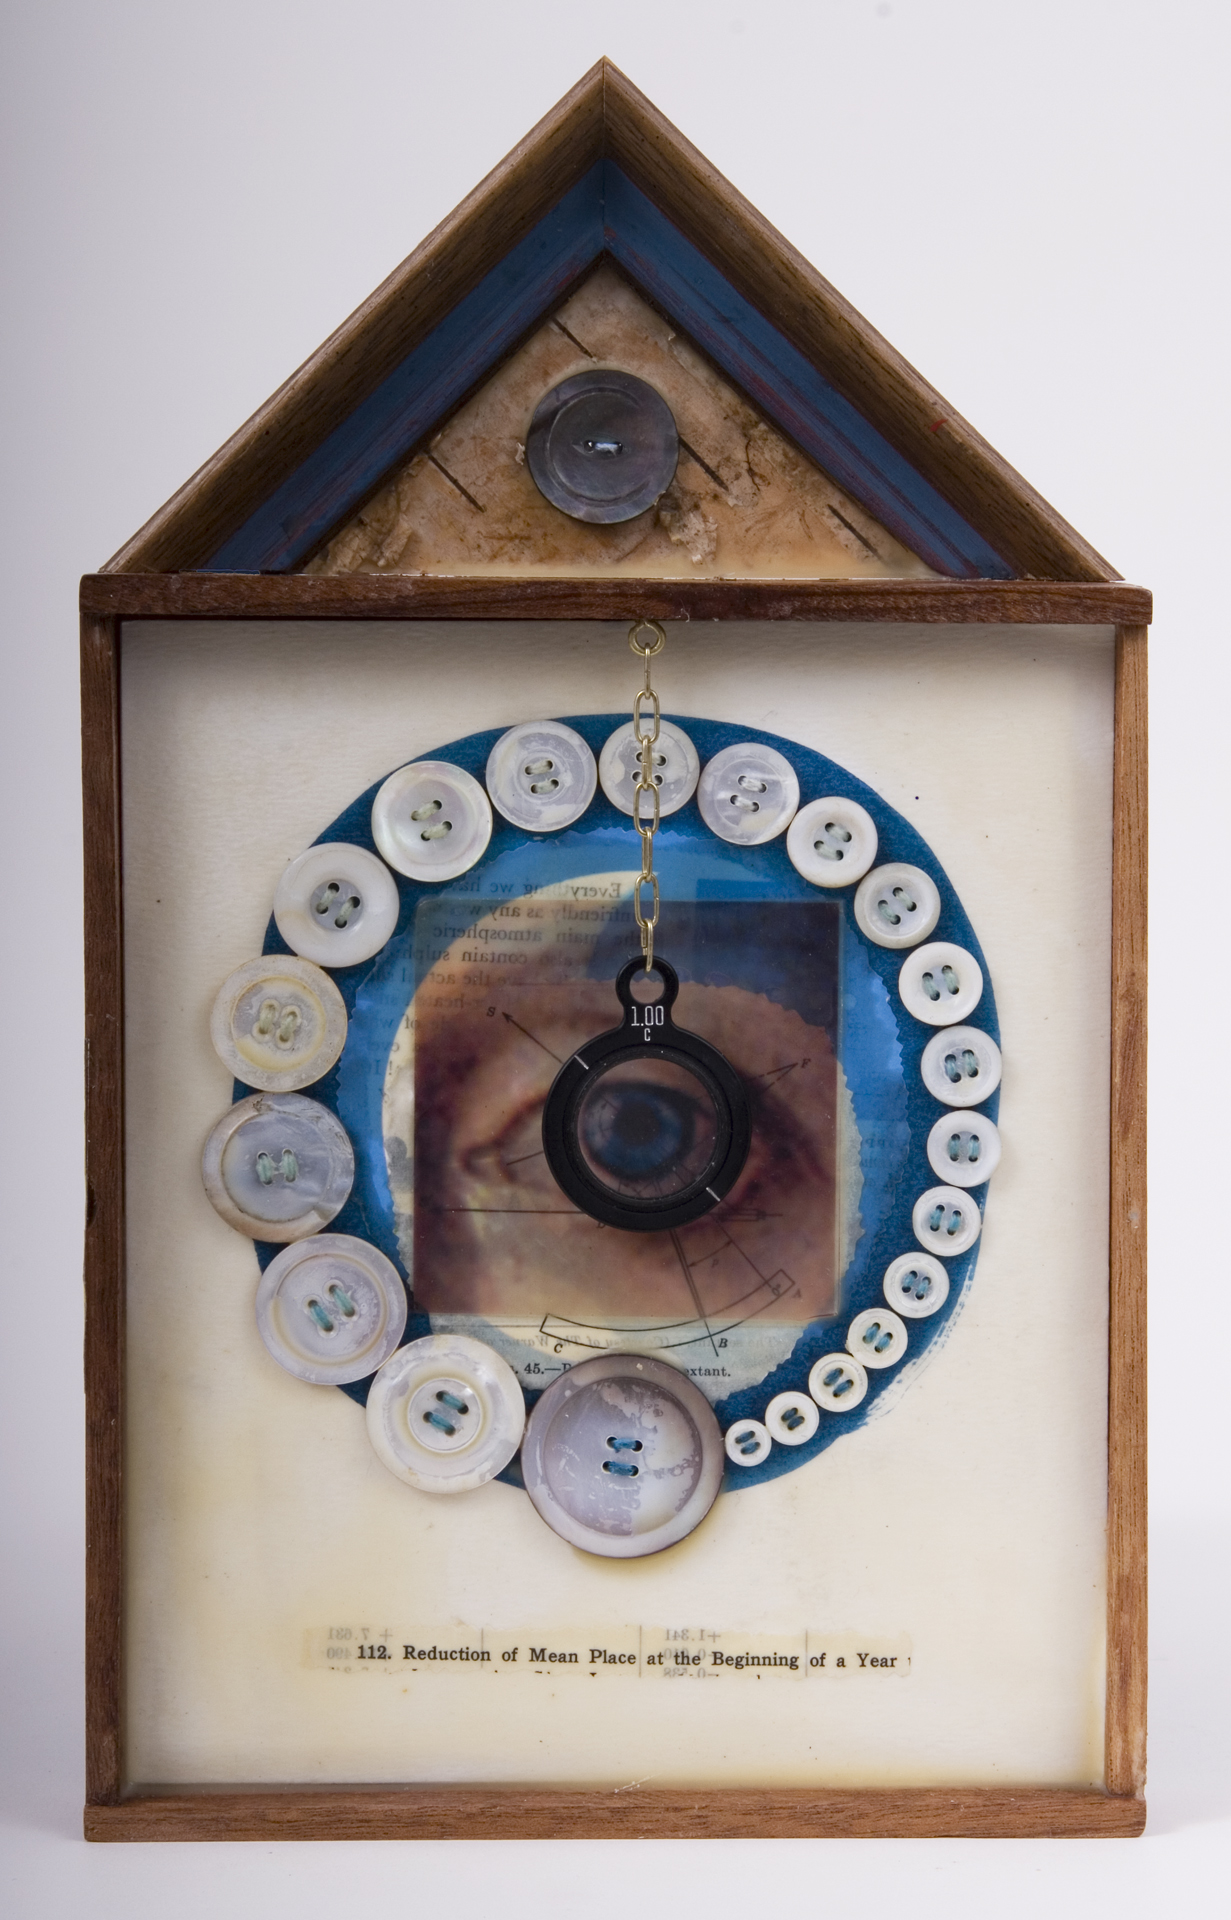 \"12. Reduction of Mean Place at the Beginning of a Year\"
mixed-media assemblage
12.5 x 7.5 x 1.5
2009
$85.00
Cigar box, frame sample, birch bark, mother of pearl buttons, fortune & tobac cards, transparency, optical lens, ink, wax, astronomy text on watercolor paper